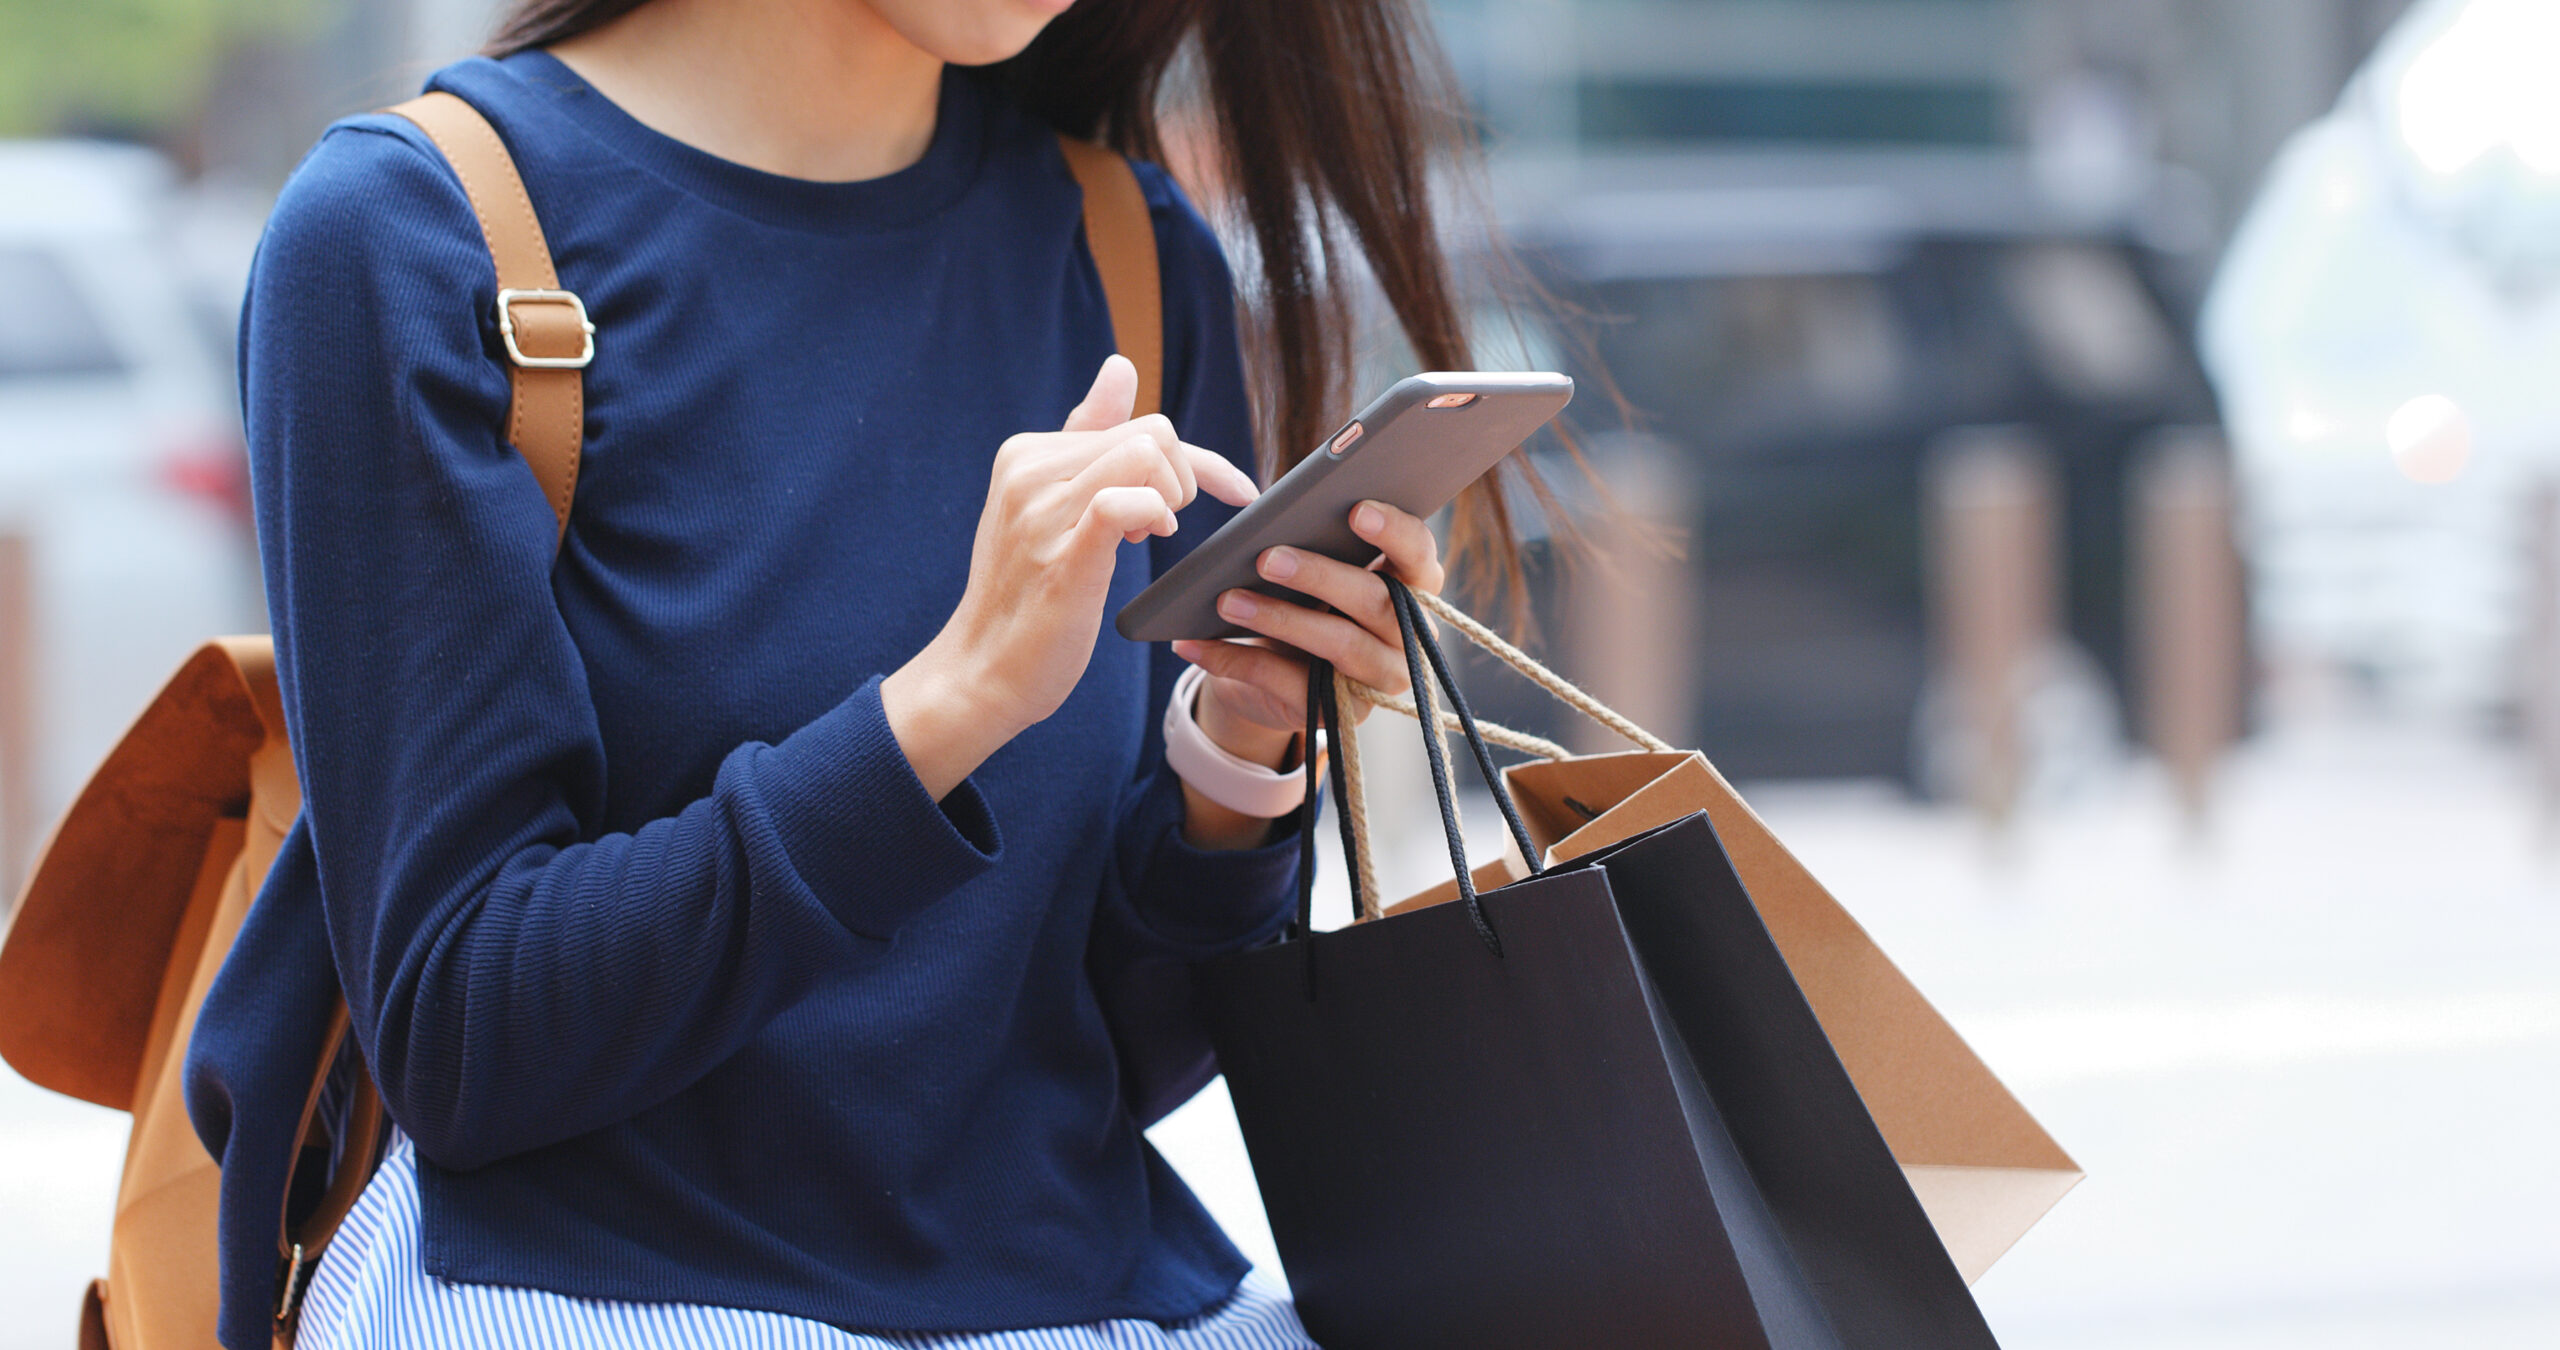 Woman,Look,At,Mobile,Phone,And,Holding,Shopping,Bag